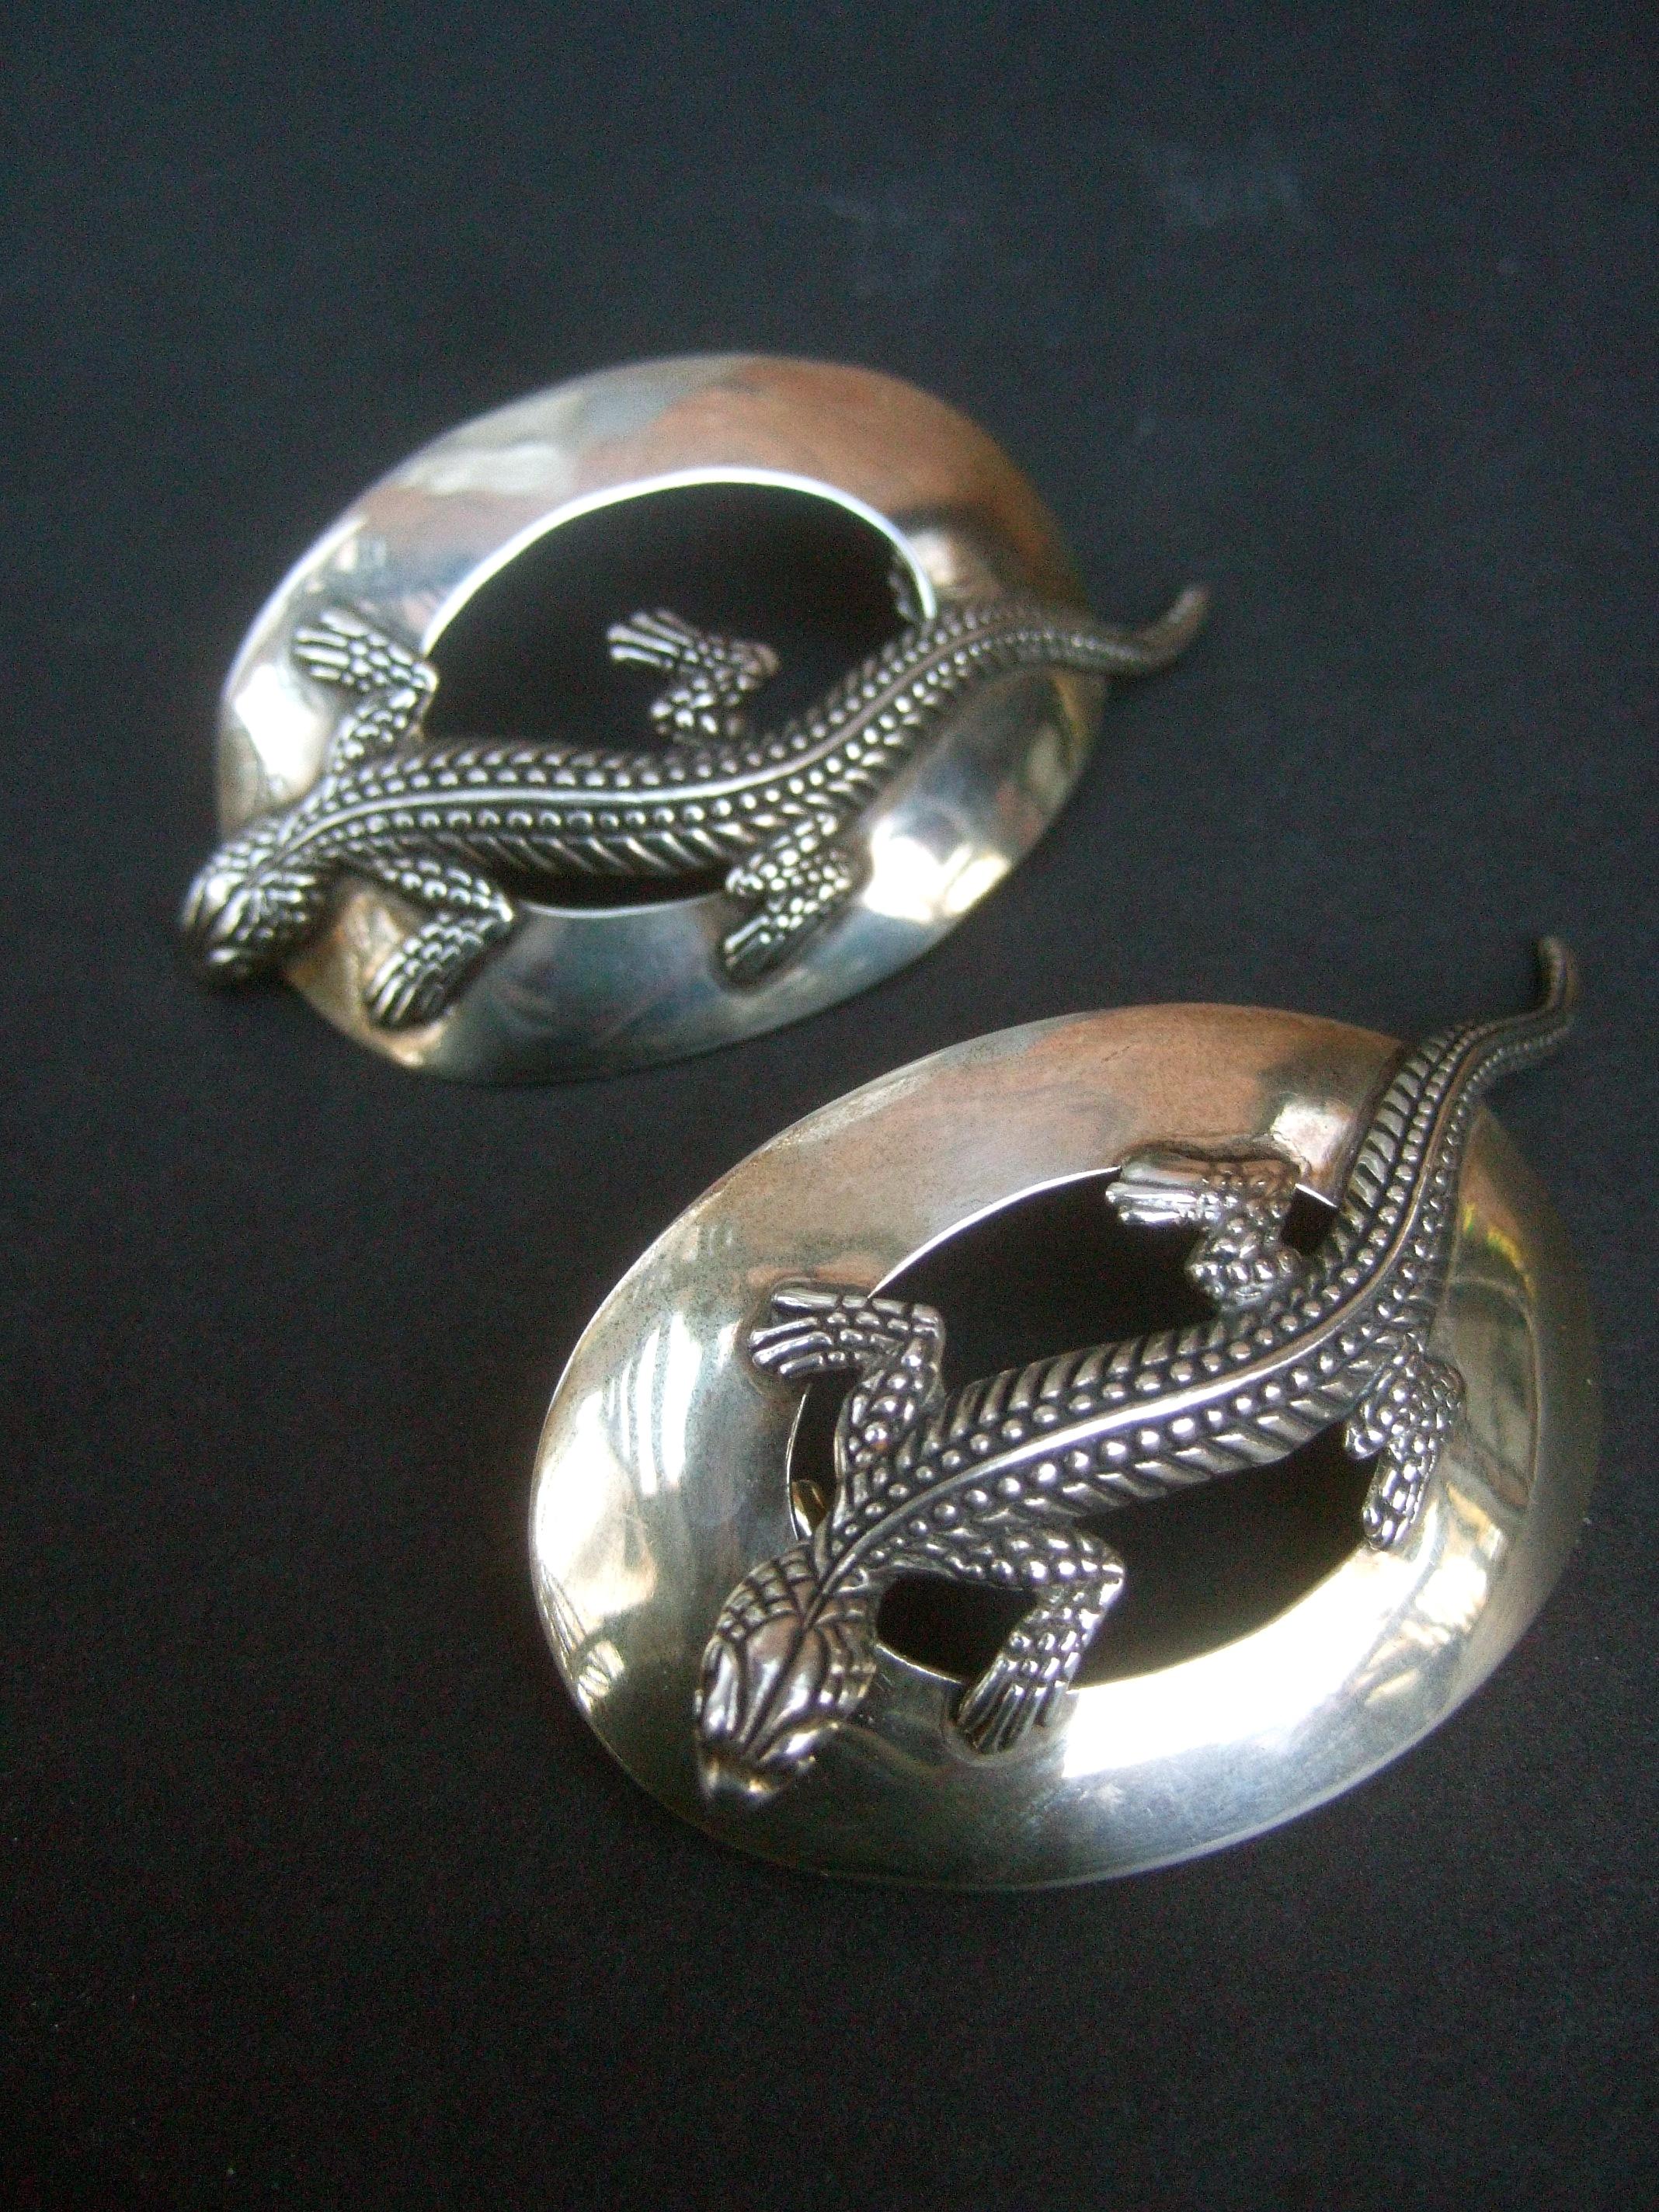 Sterling silver massive figural lizard artisan pierced earrings c 1990
The large scale artisan earrings are designed with a sinuous lizard figure; embellished with impressed and etched detail emulating scales

In contrast, the sterling oval-shaped